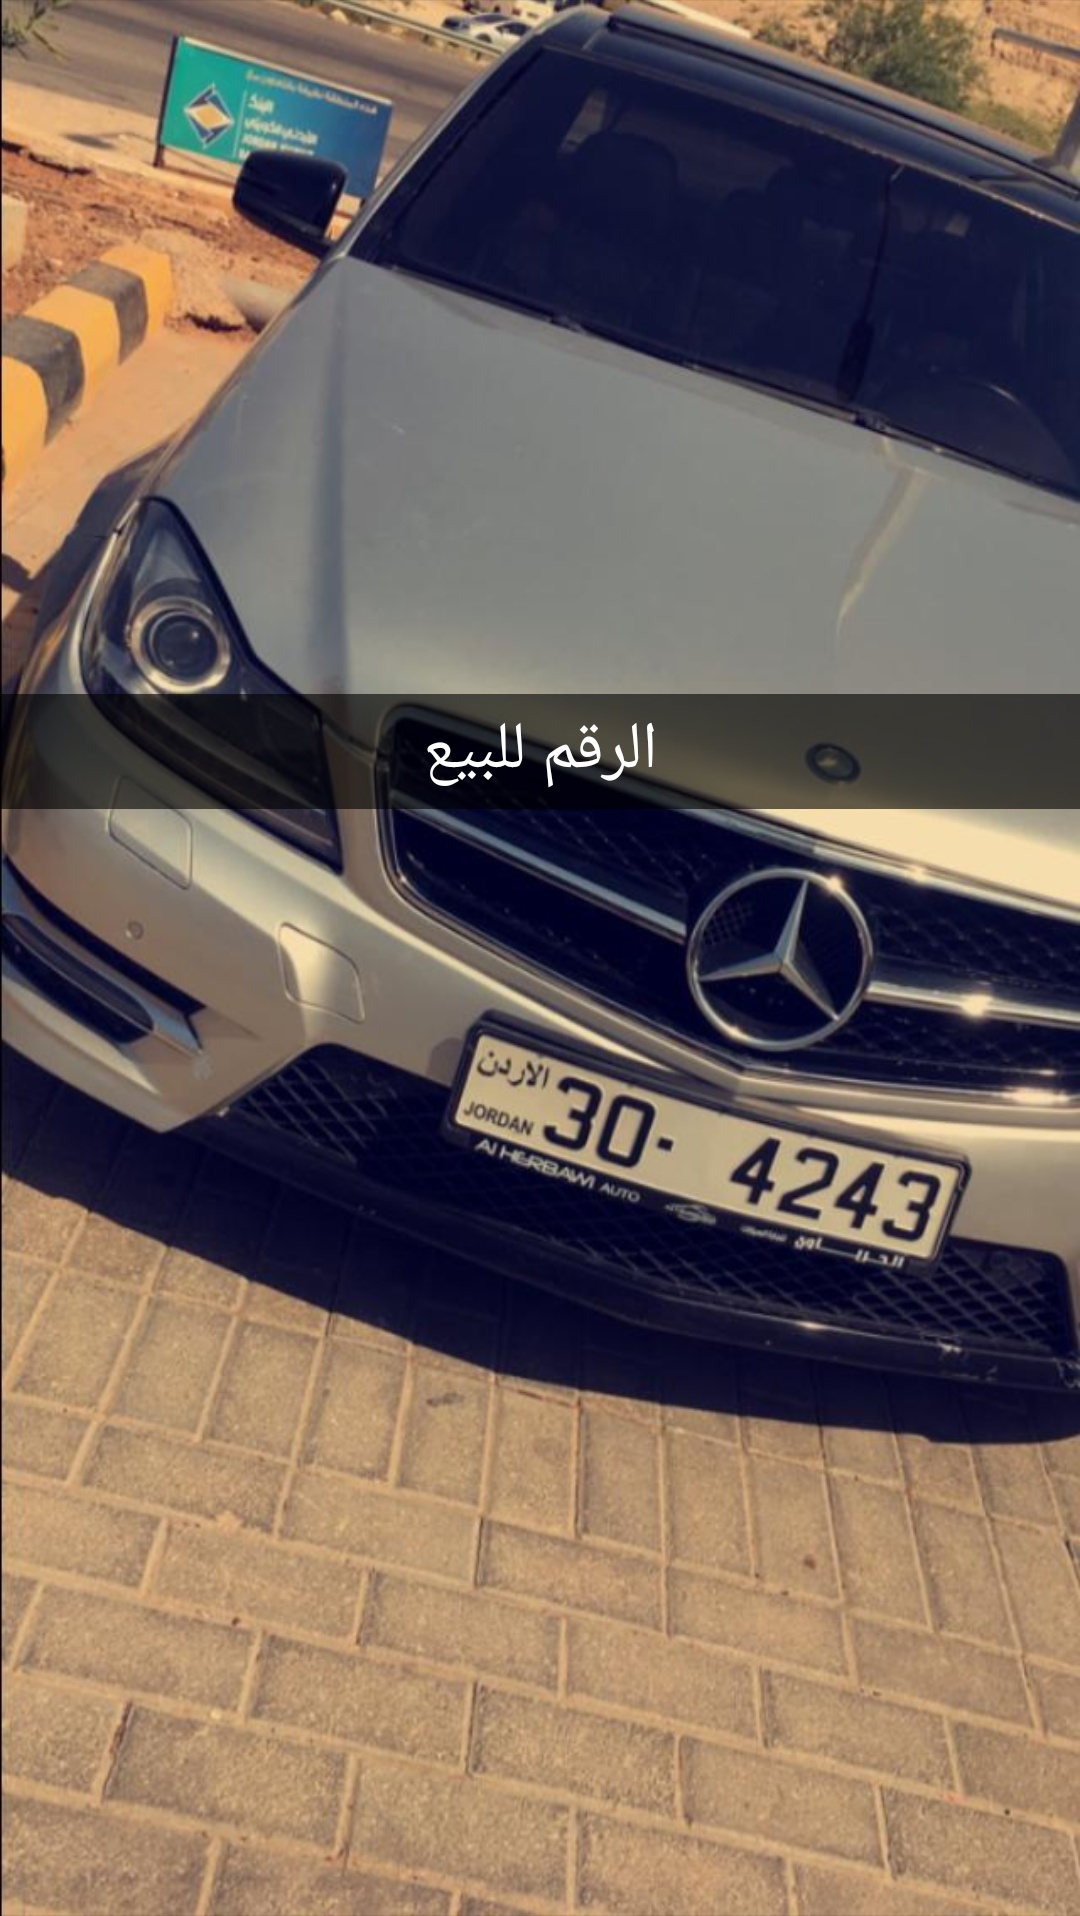 Mercedes Benz GLE 350d 4Matic 2017 model13, 000 km Excellet User conditions . V6 SUV . 2,987 cc , Perfect inside out , . No Accident ...vehicle owners - 1 Warra-  رقم رباعي مميز للبيع لا...